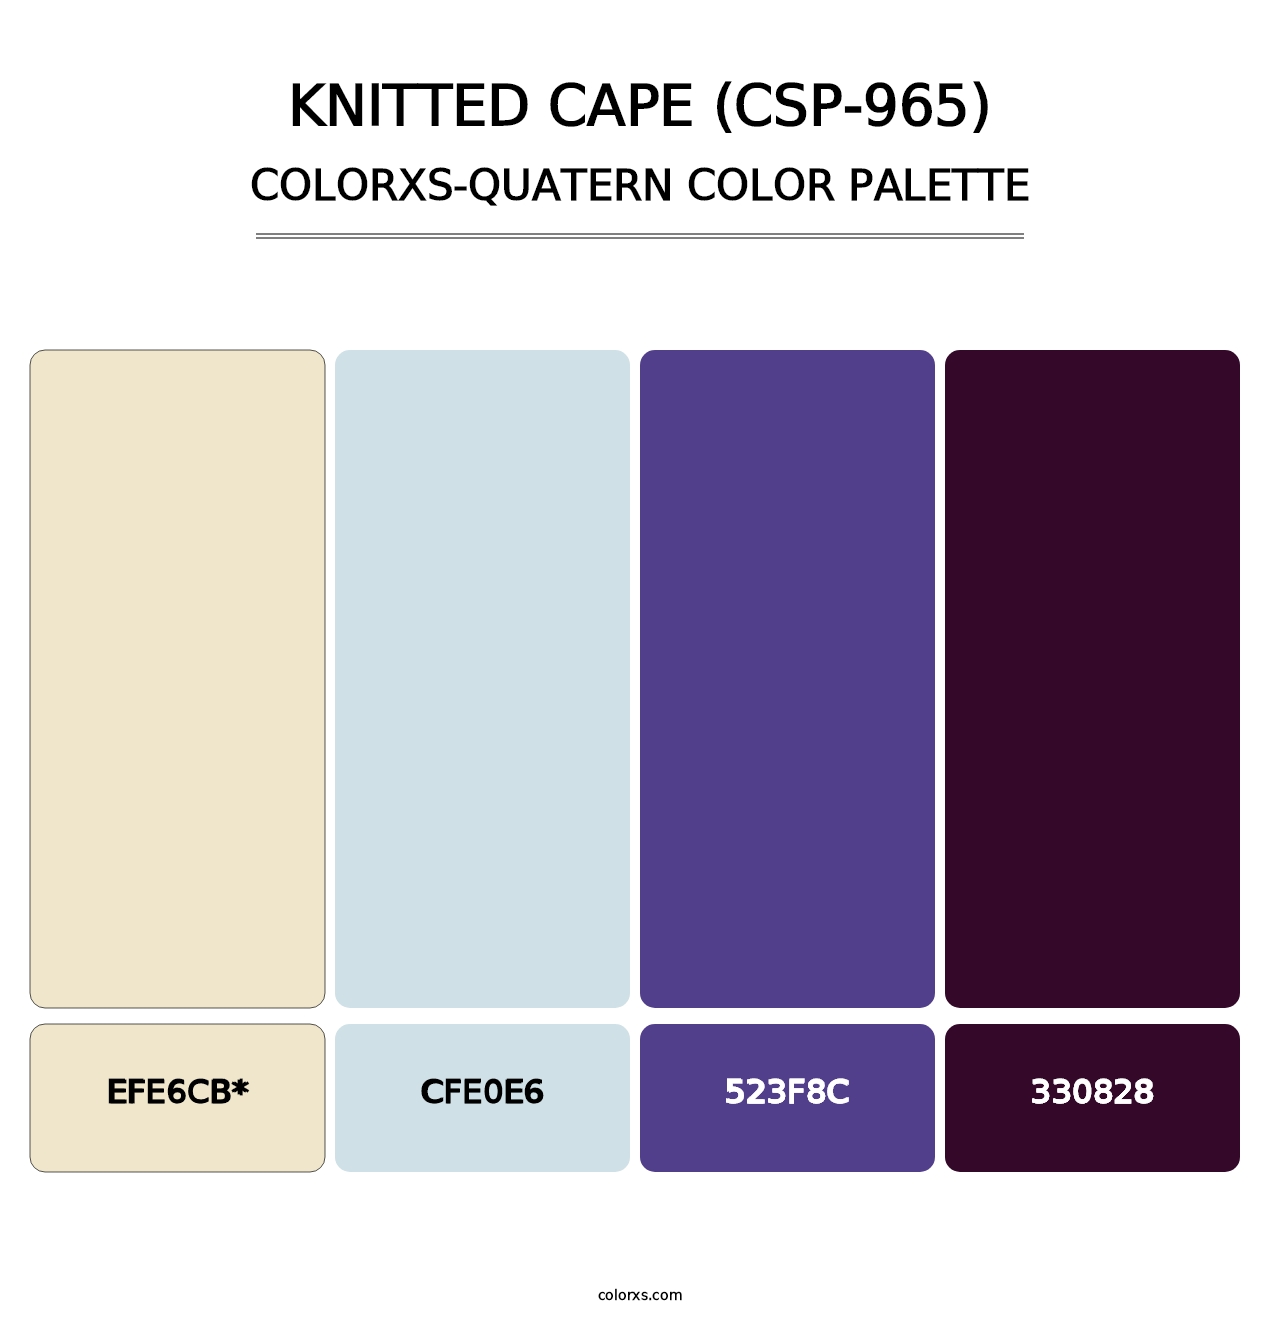 Knitted Cape (CSP-965) - Colorxs Quatern Palette